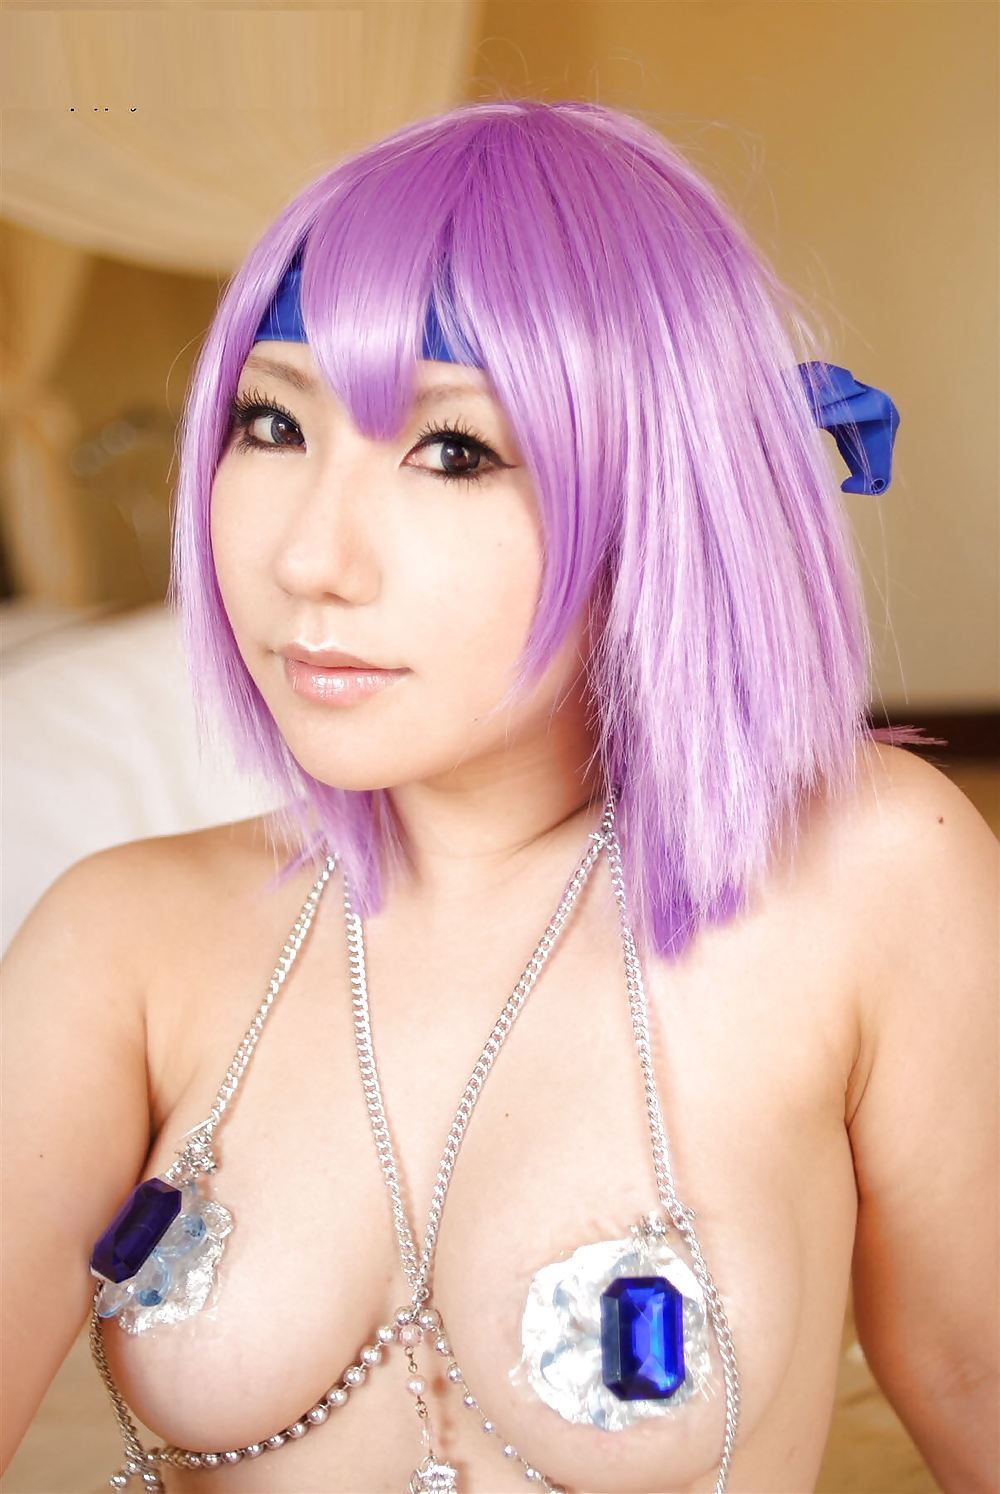 Giapponese cosplay cuties-ayane (doax) (1)
 #5263474